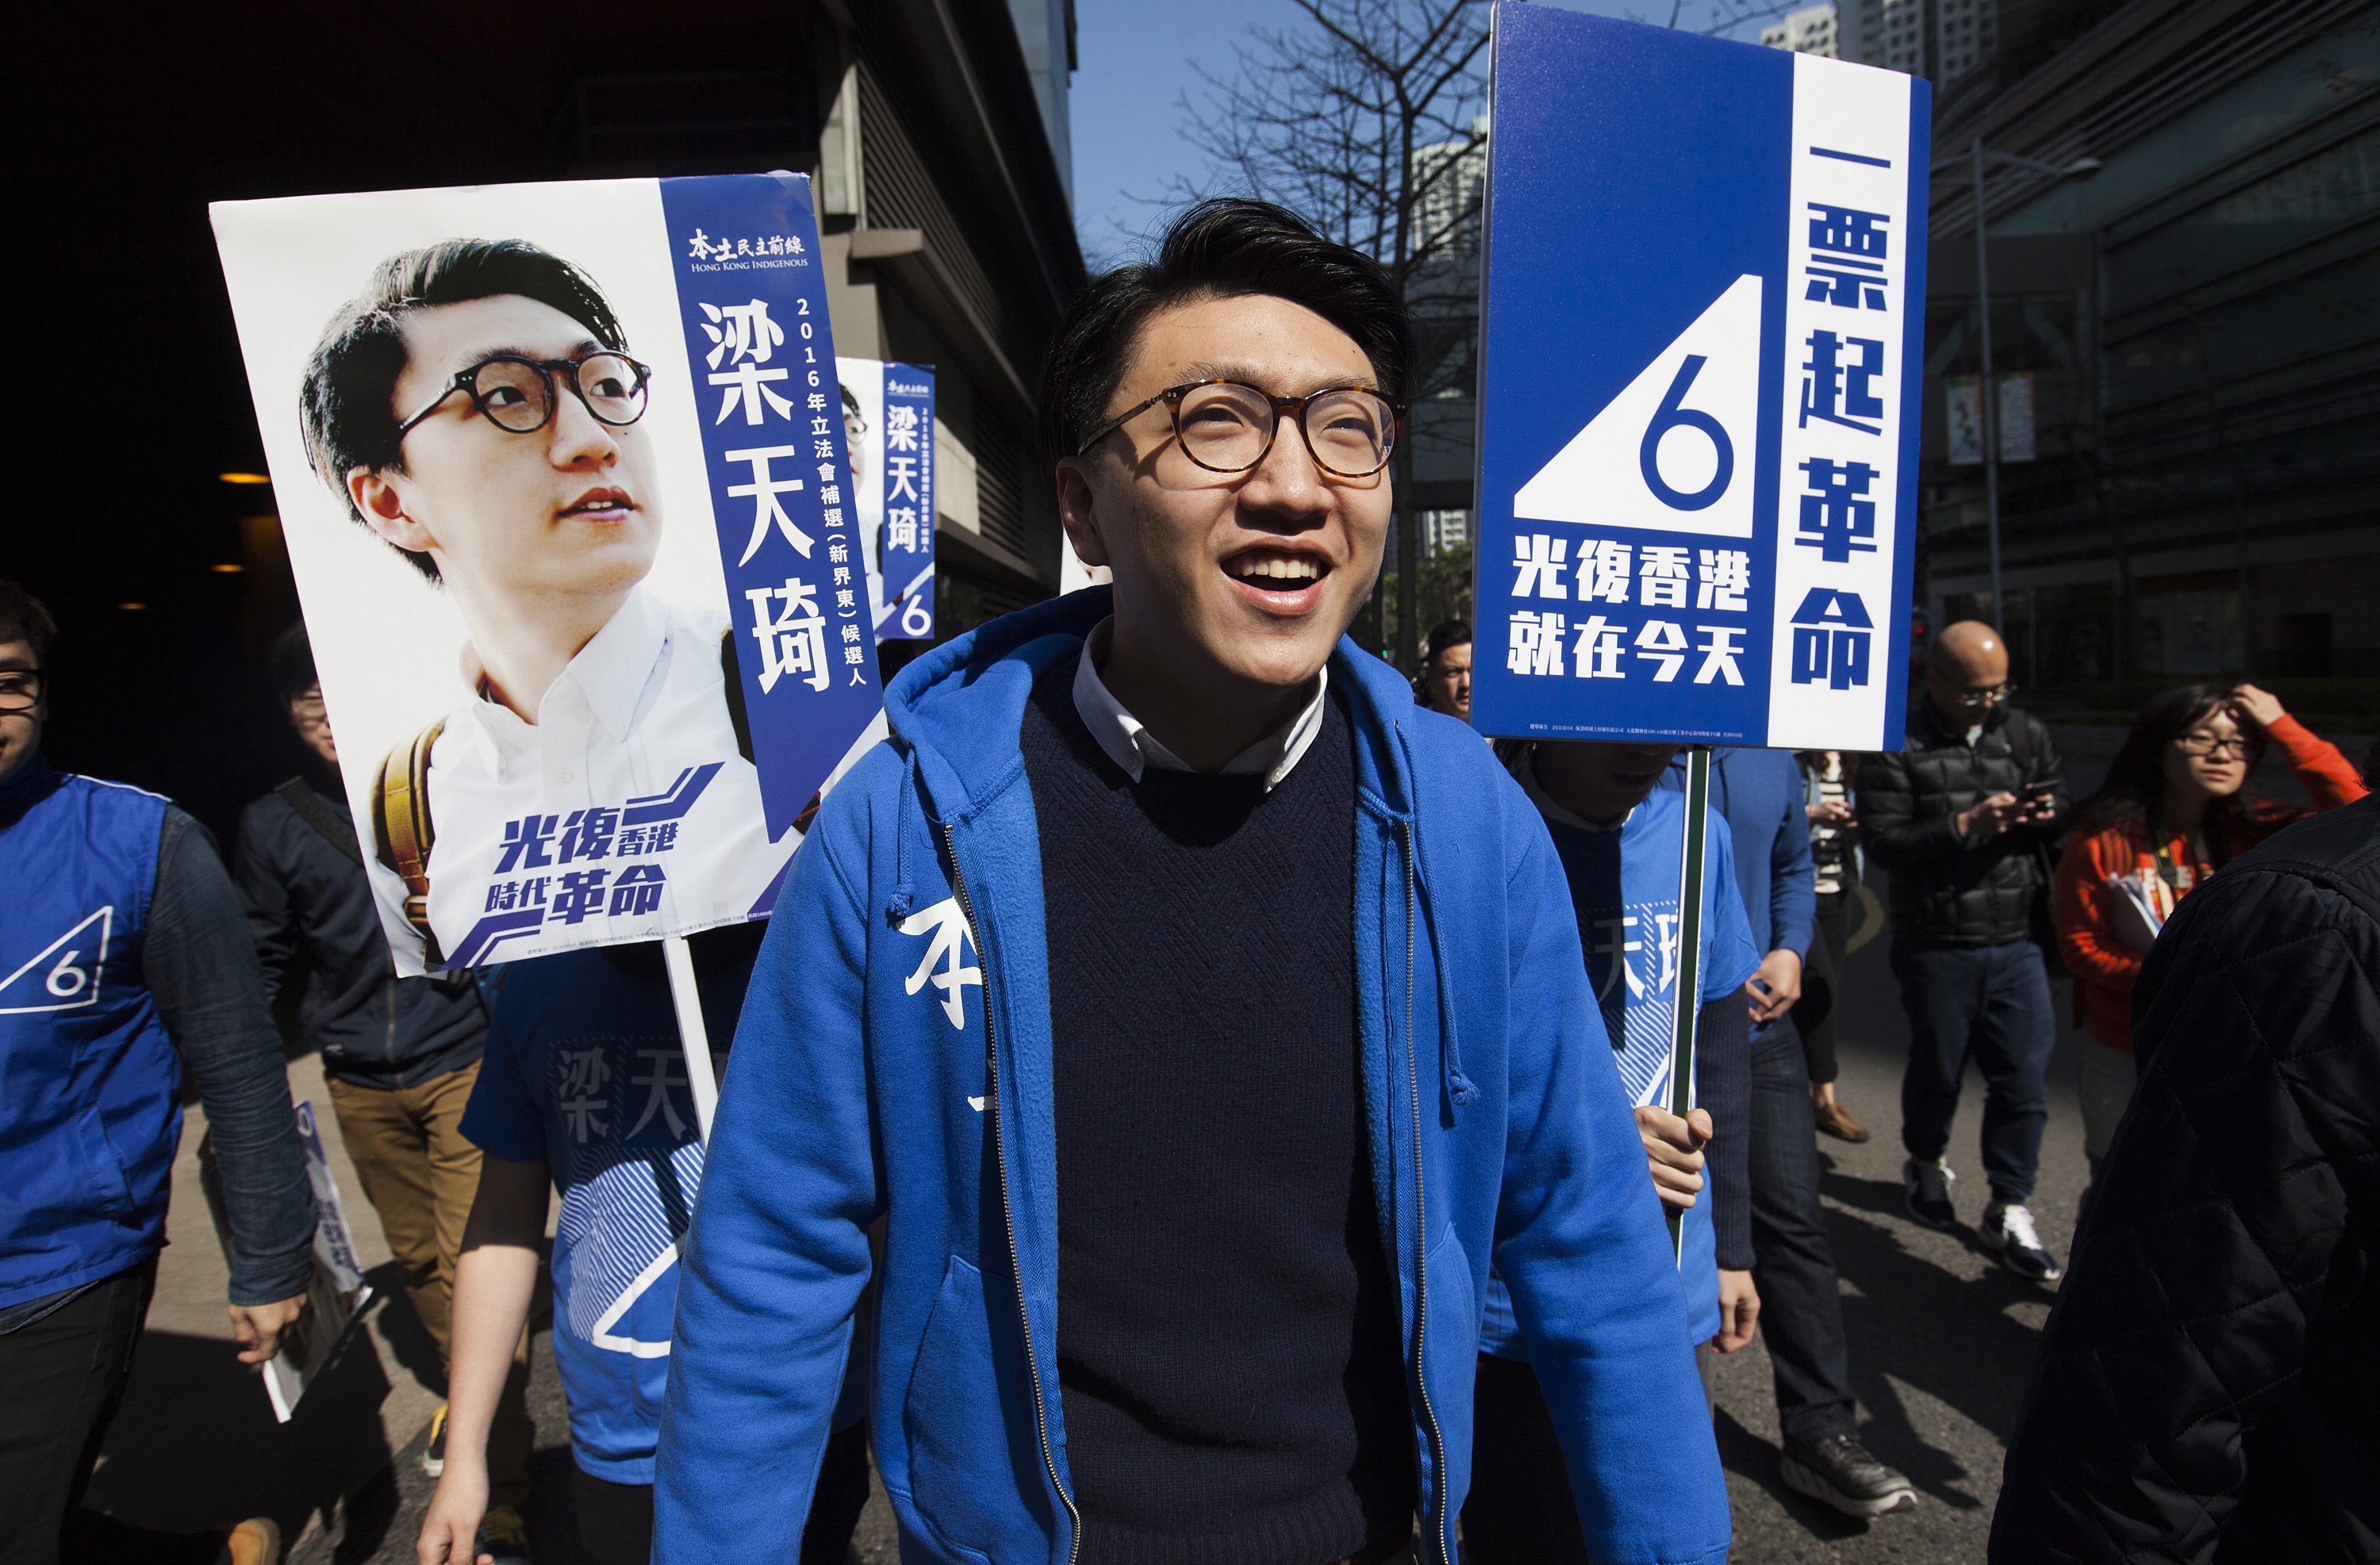 Edward Leung of Hong Kong Indigenous saw the votes he won as an endorsement of his party’s political philosophy and “means of protest”. Photo: EPA